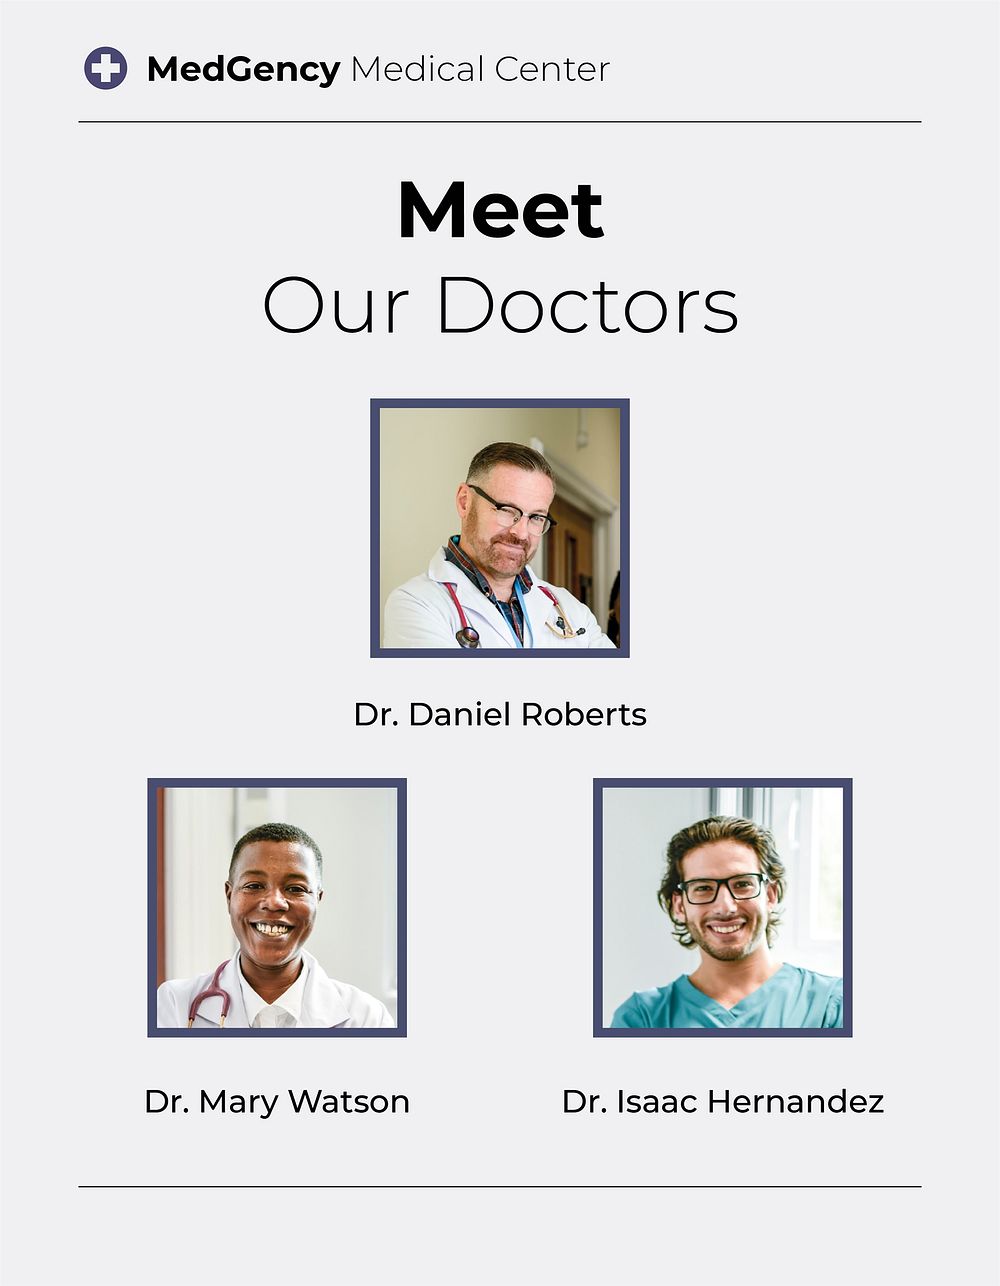 Meet our doctors flyer template, medical business psd